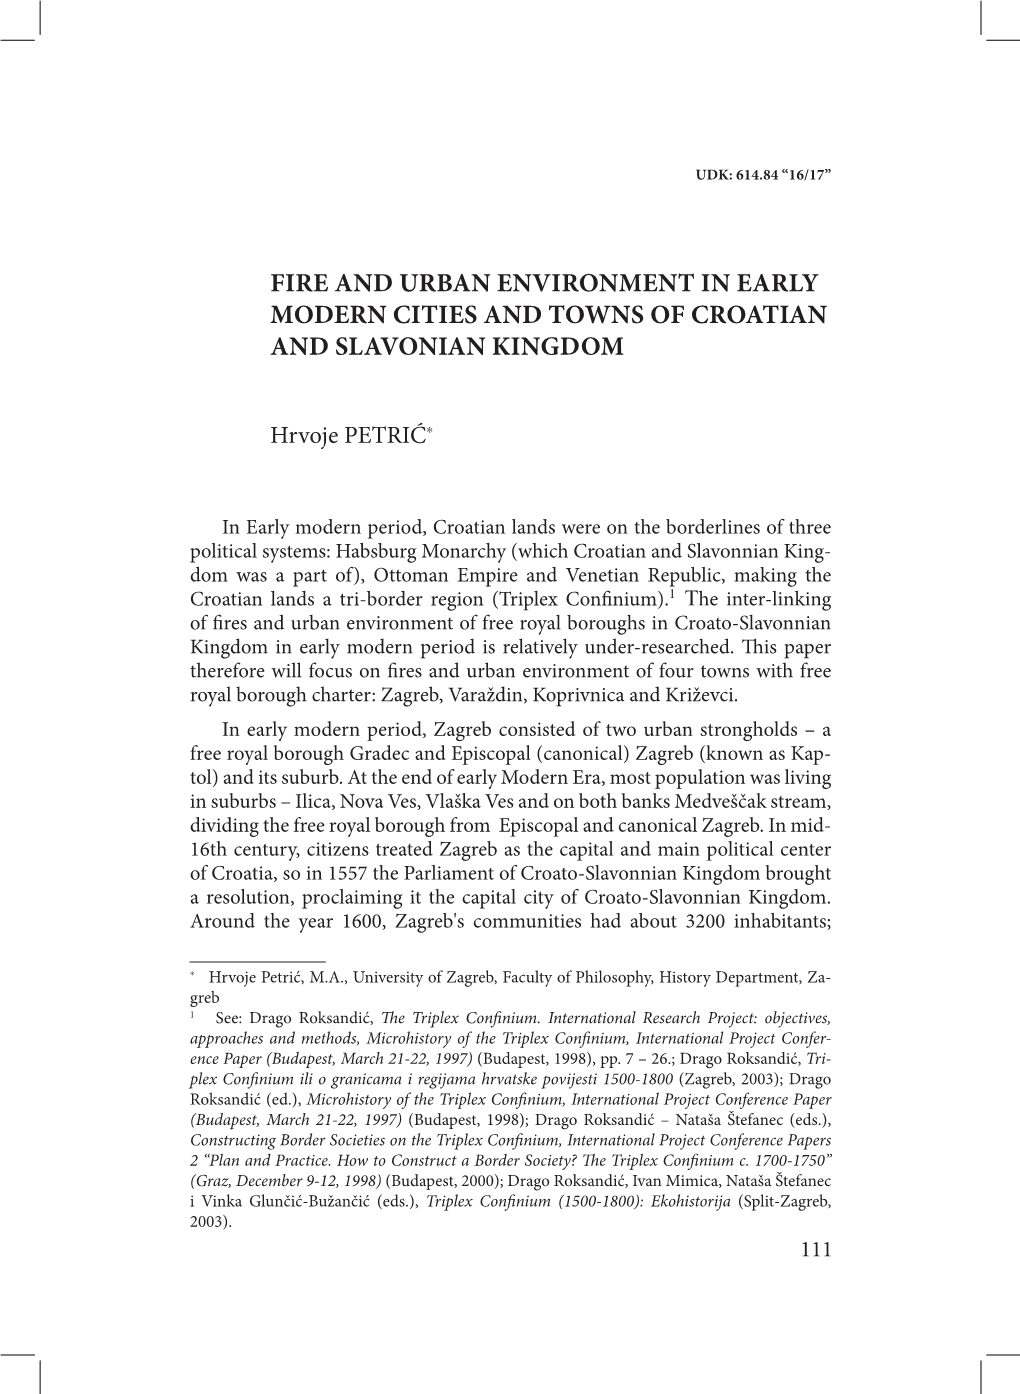 Fire and Urban Environment in Early Modern Cities and Towns of Croatian and Slavonian Kingdom